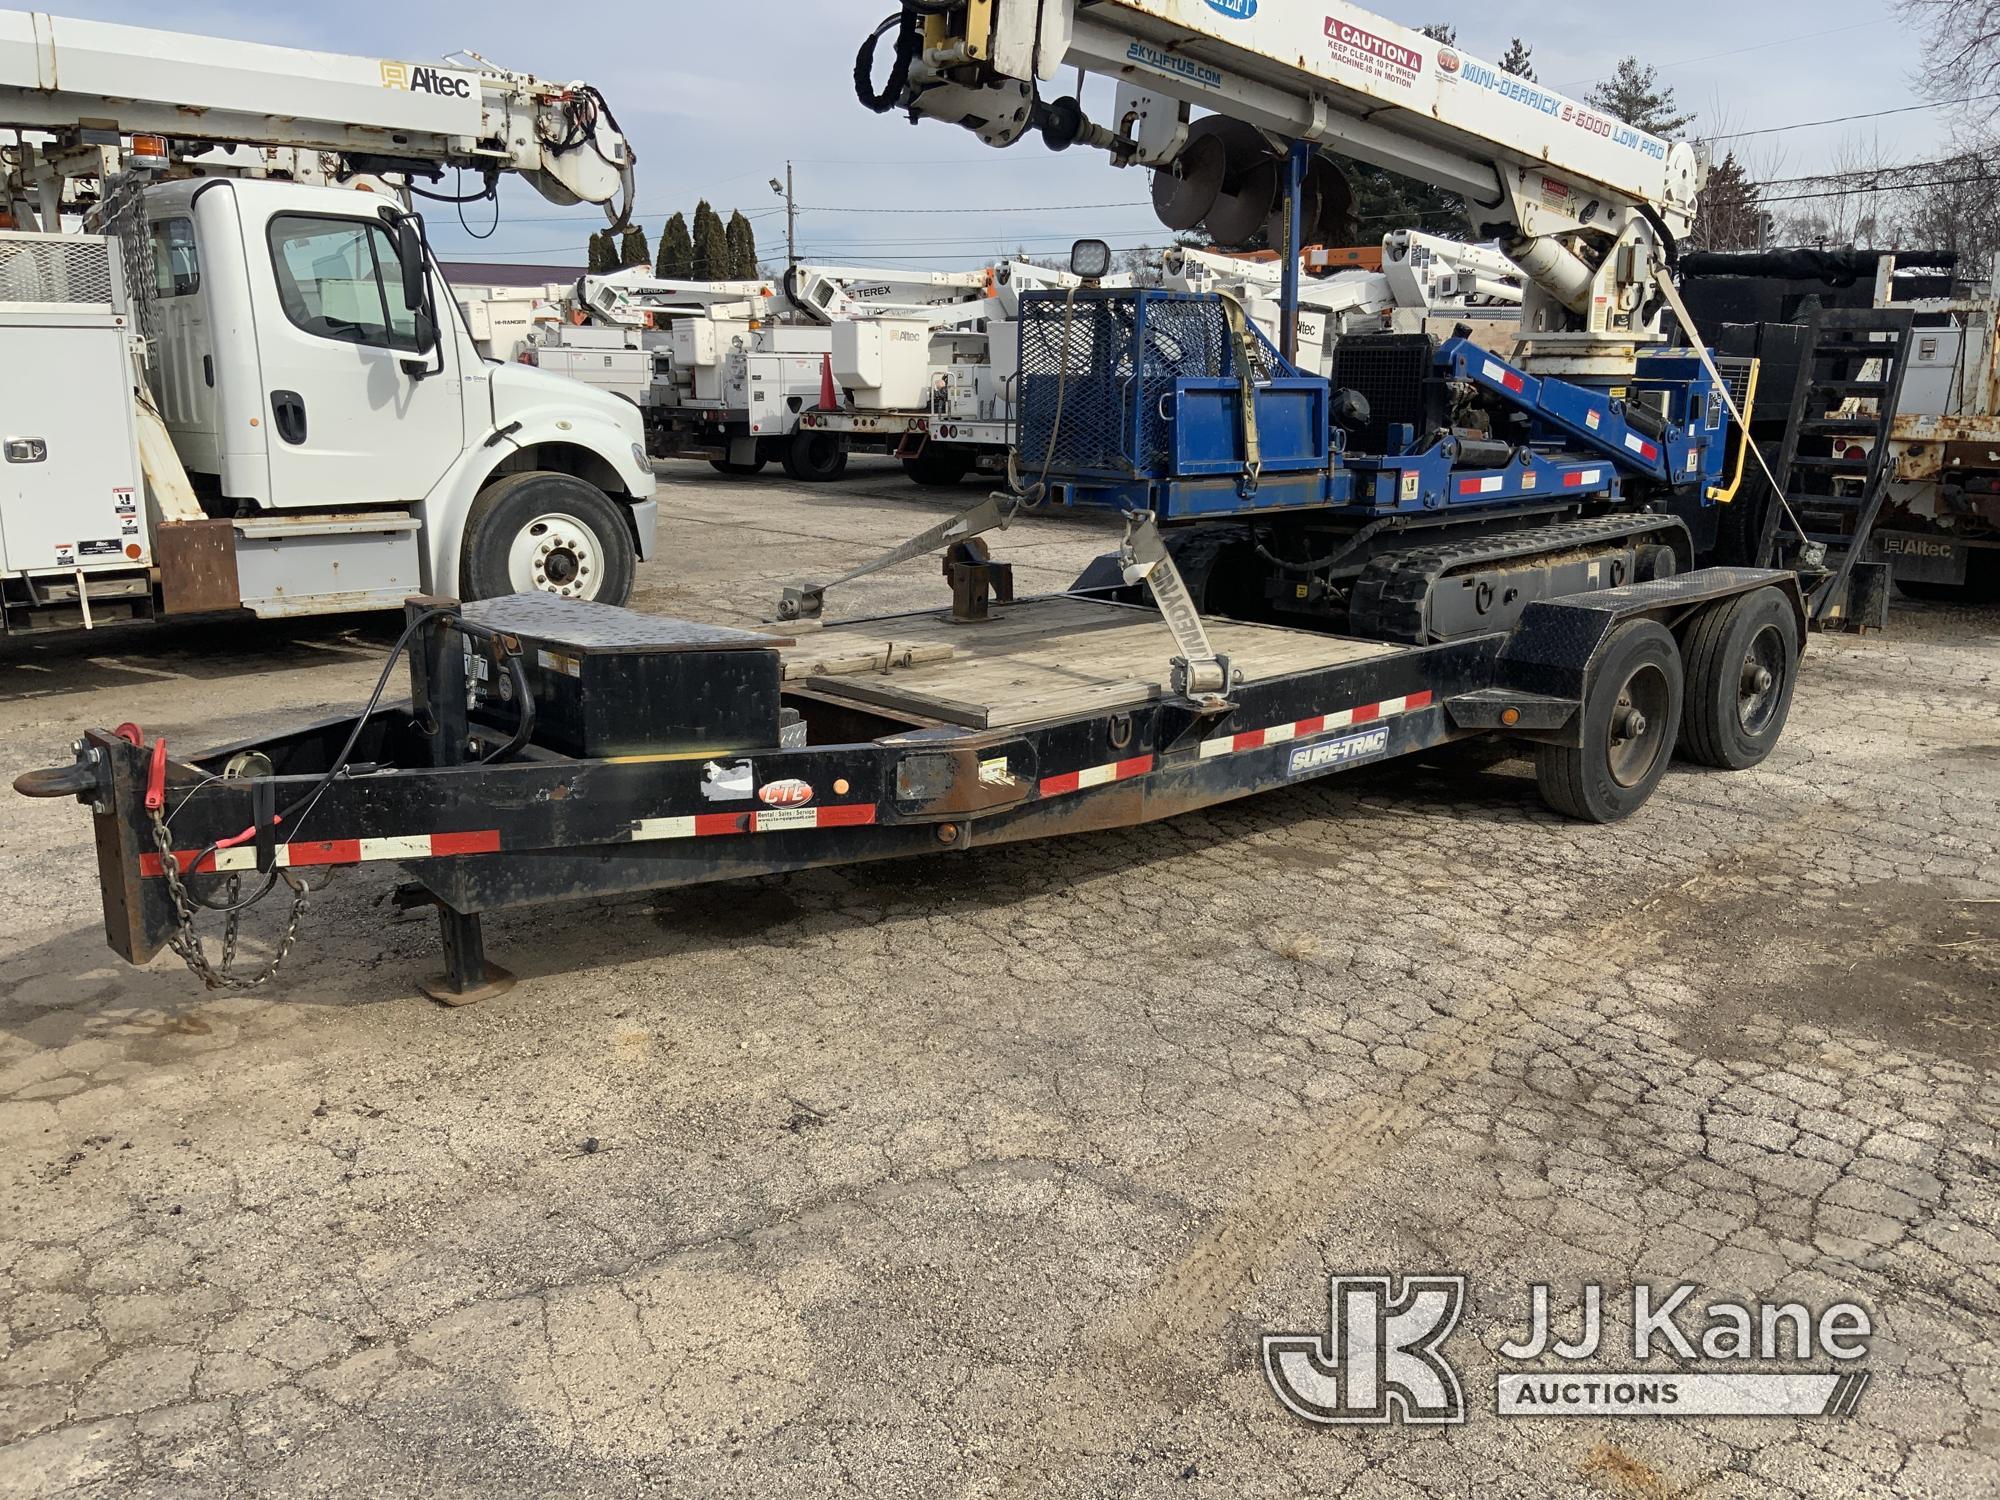 (South Beloit, IL) SkyLift 600LP Not Running, Condition Unknown) (Seller States: Hole In Piston, Nee